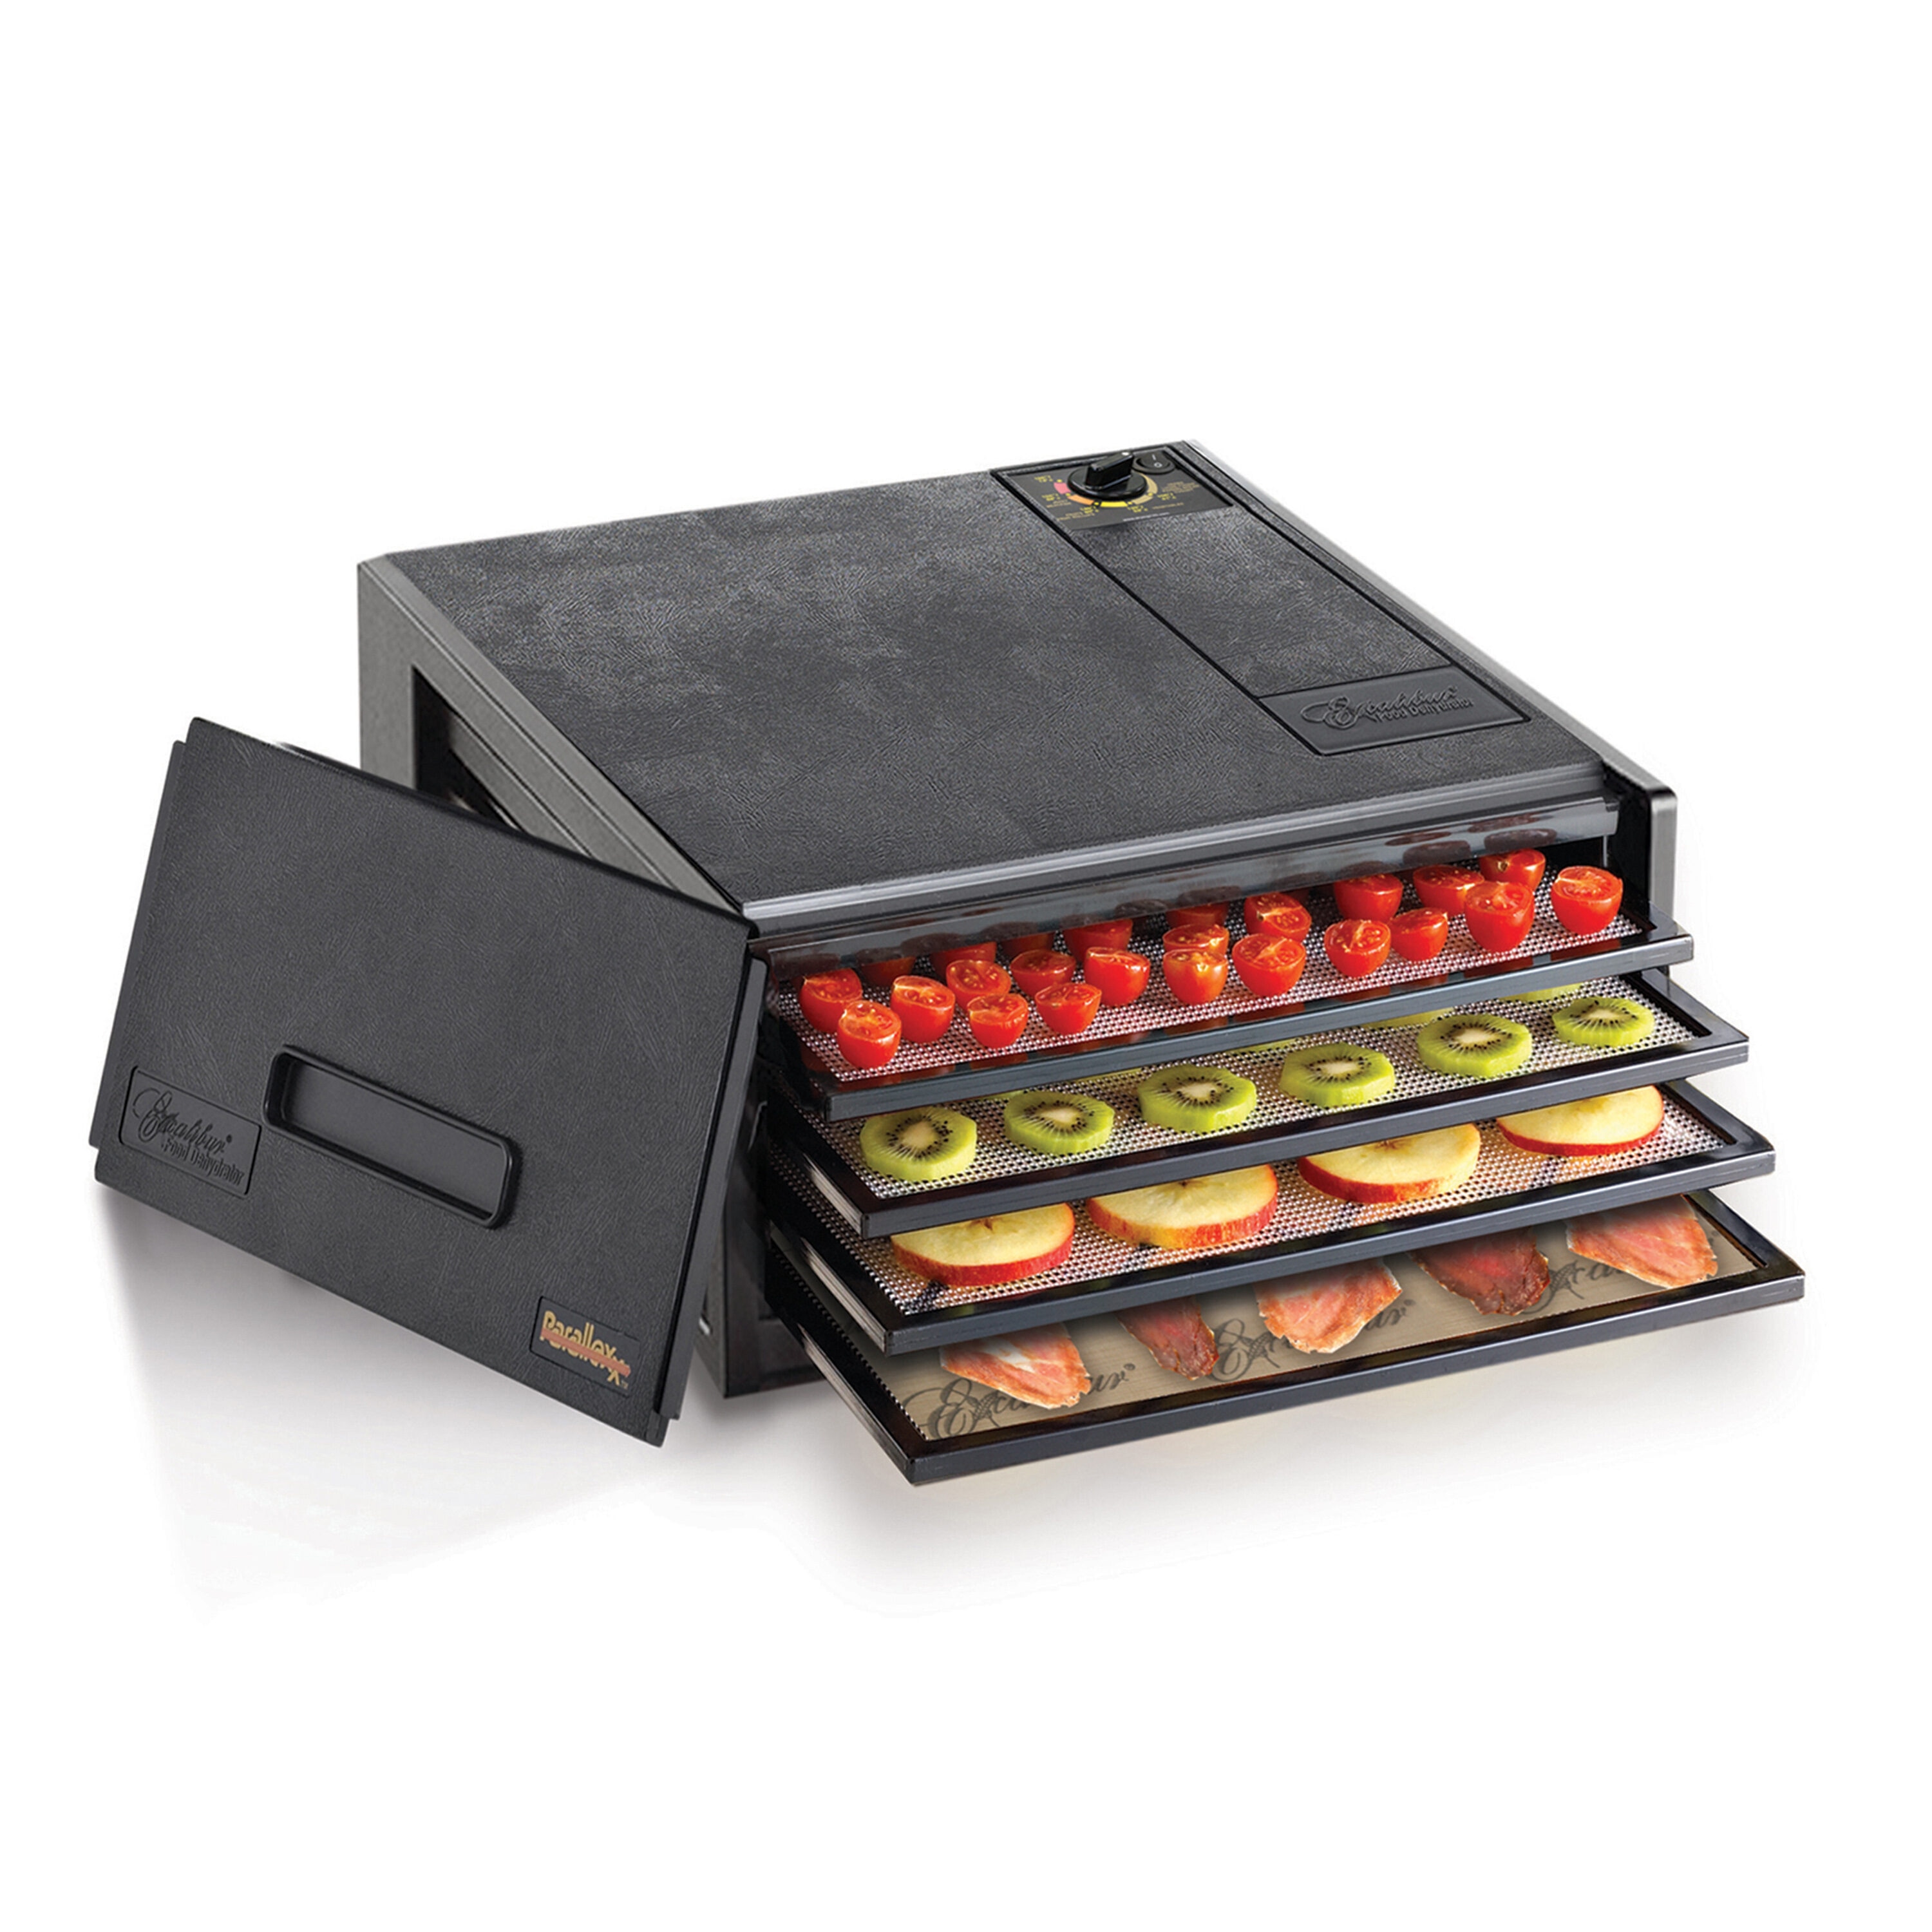 3 Stainless Steel Trays Compatible With Excalibur Dehydrator